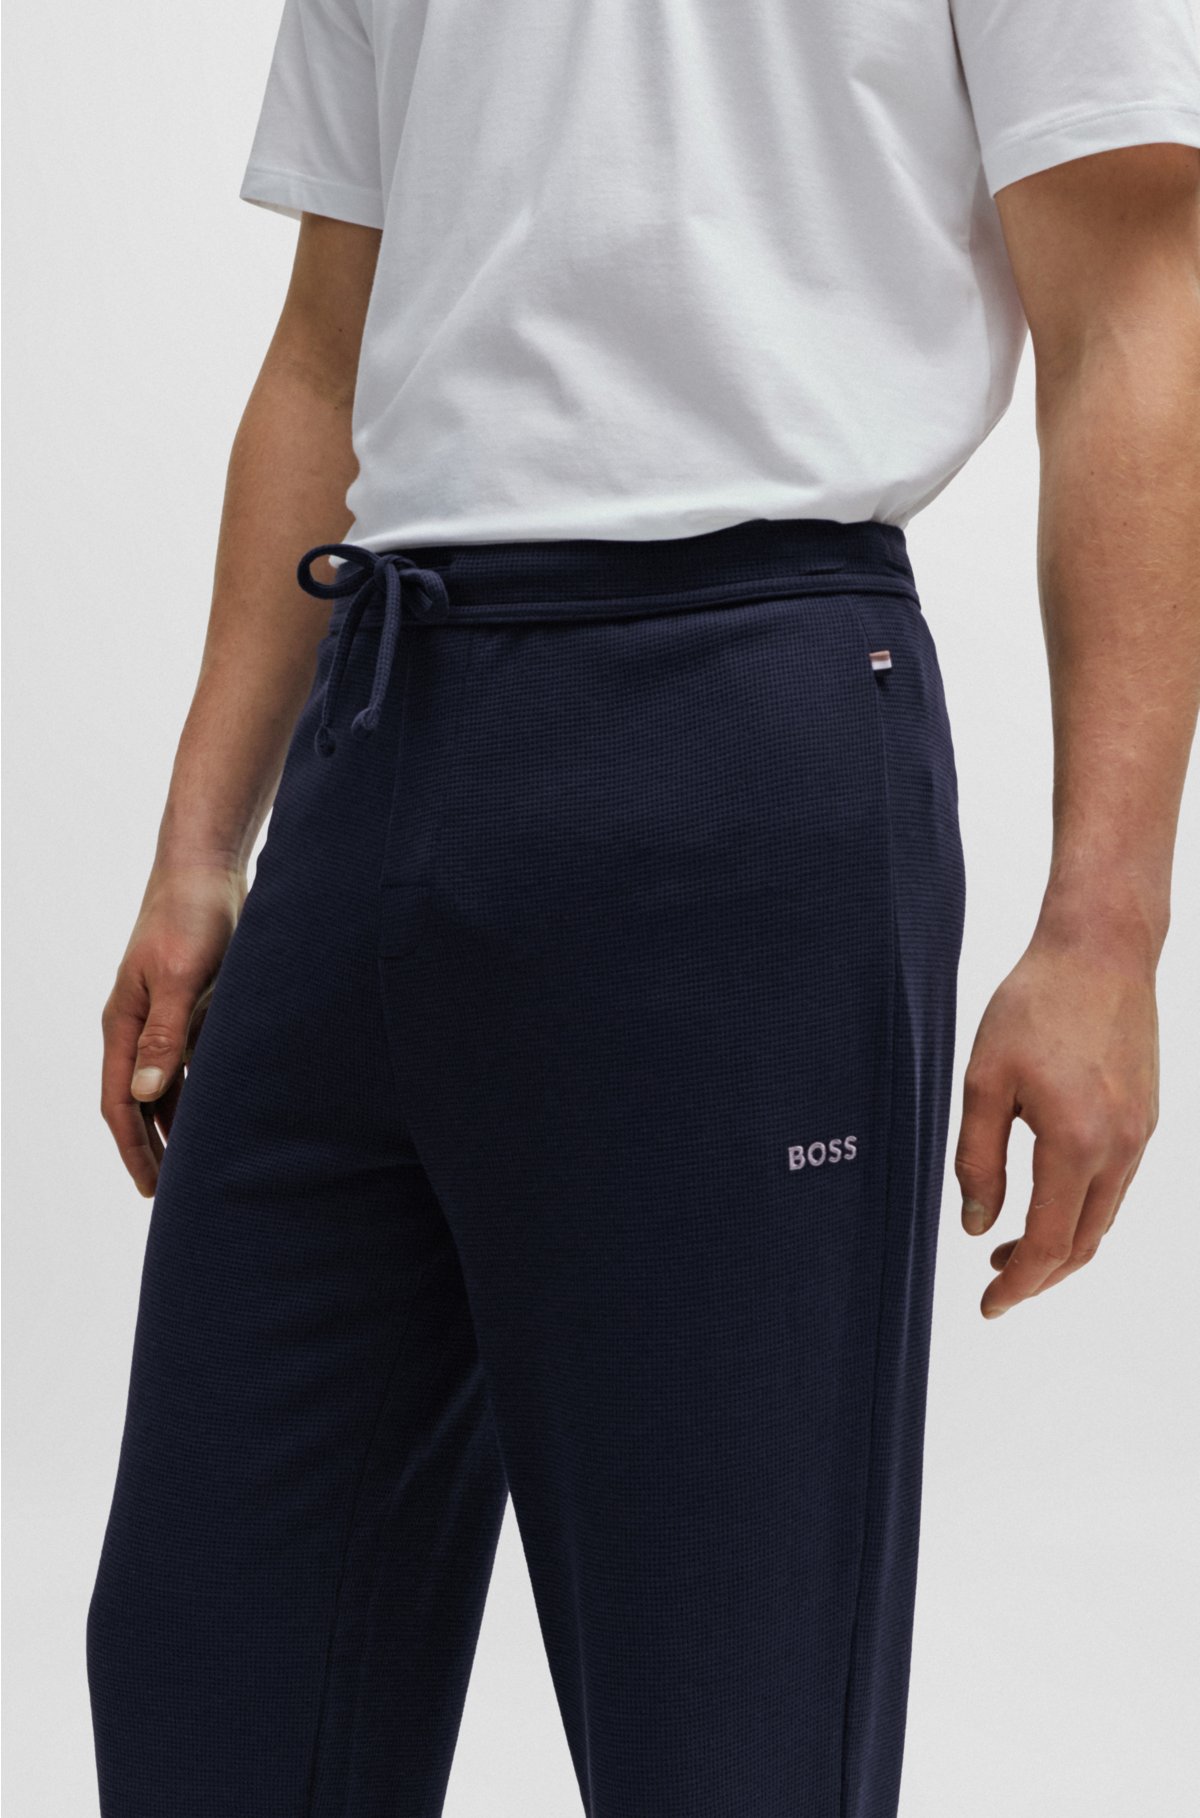 Cotton-blend bottoms embroidered BOSS with pyjama logo -